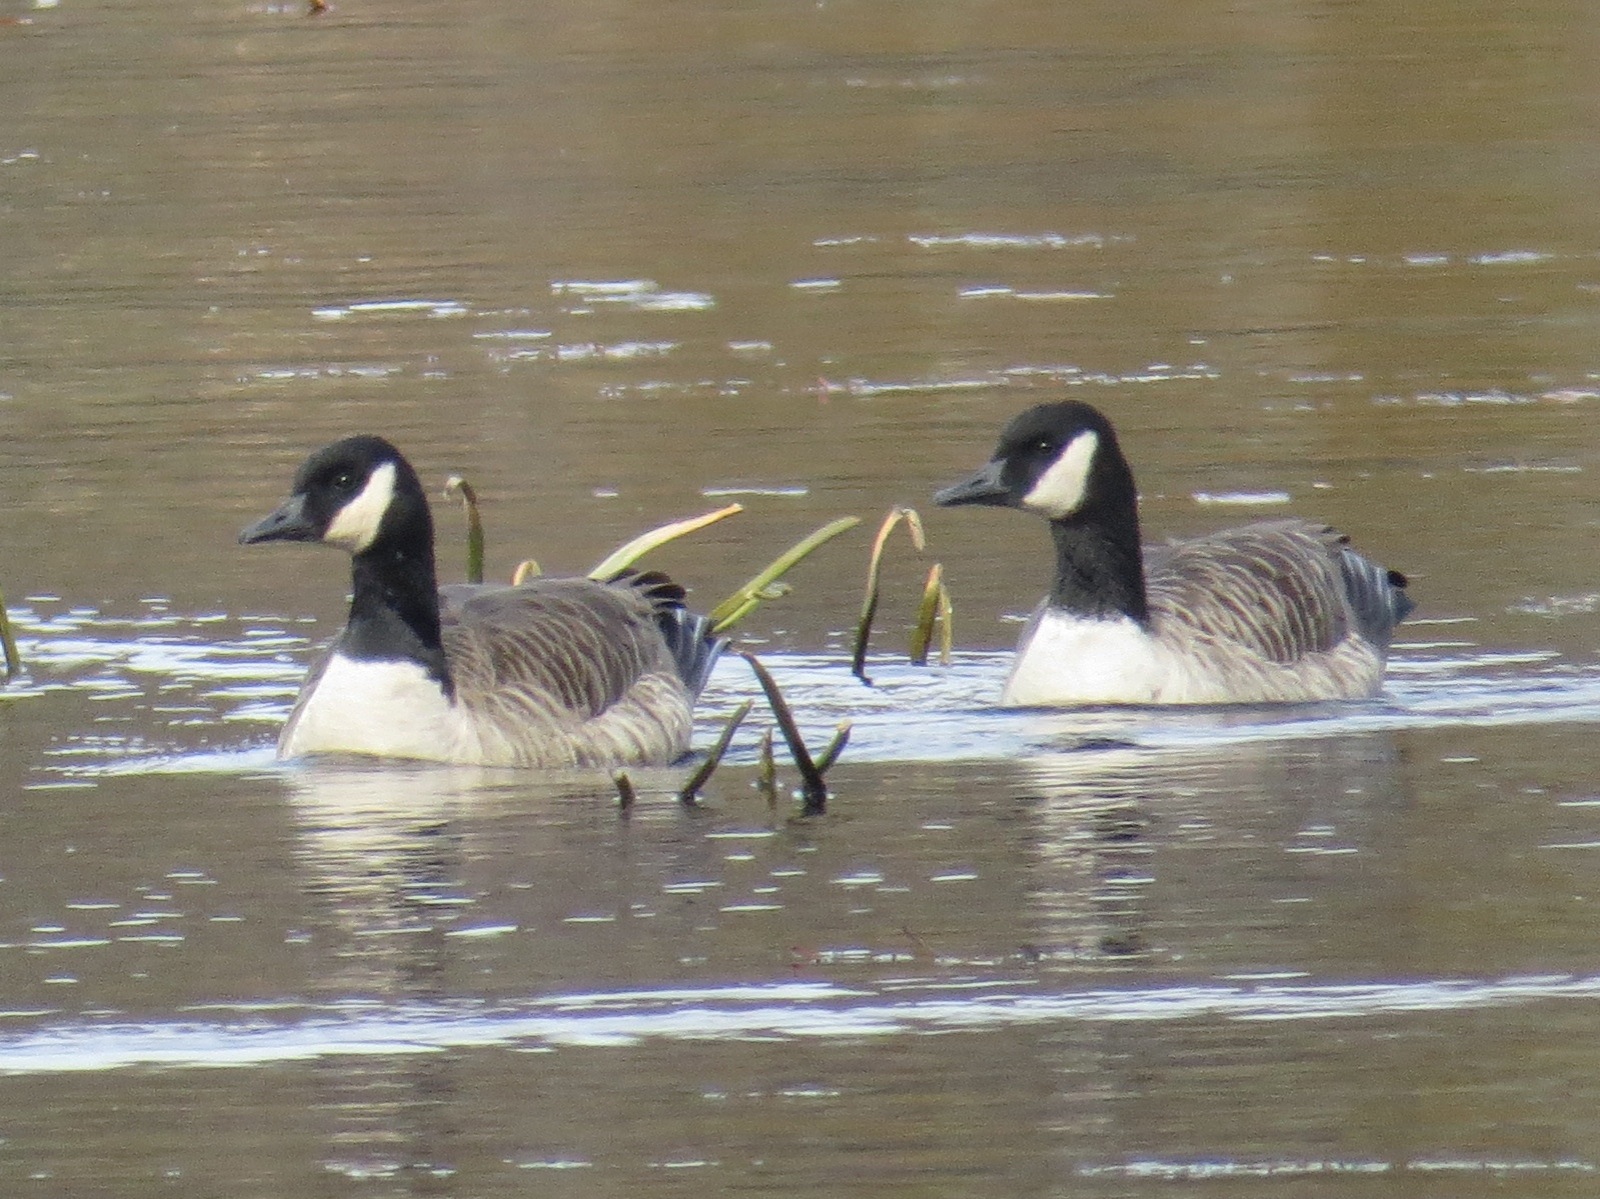 Two Cackling-ish Geese. Concord, MA, 5 Nov 2014.